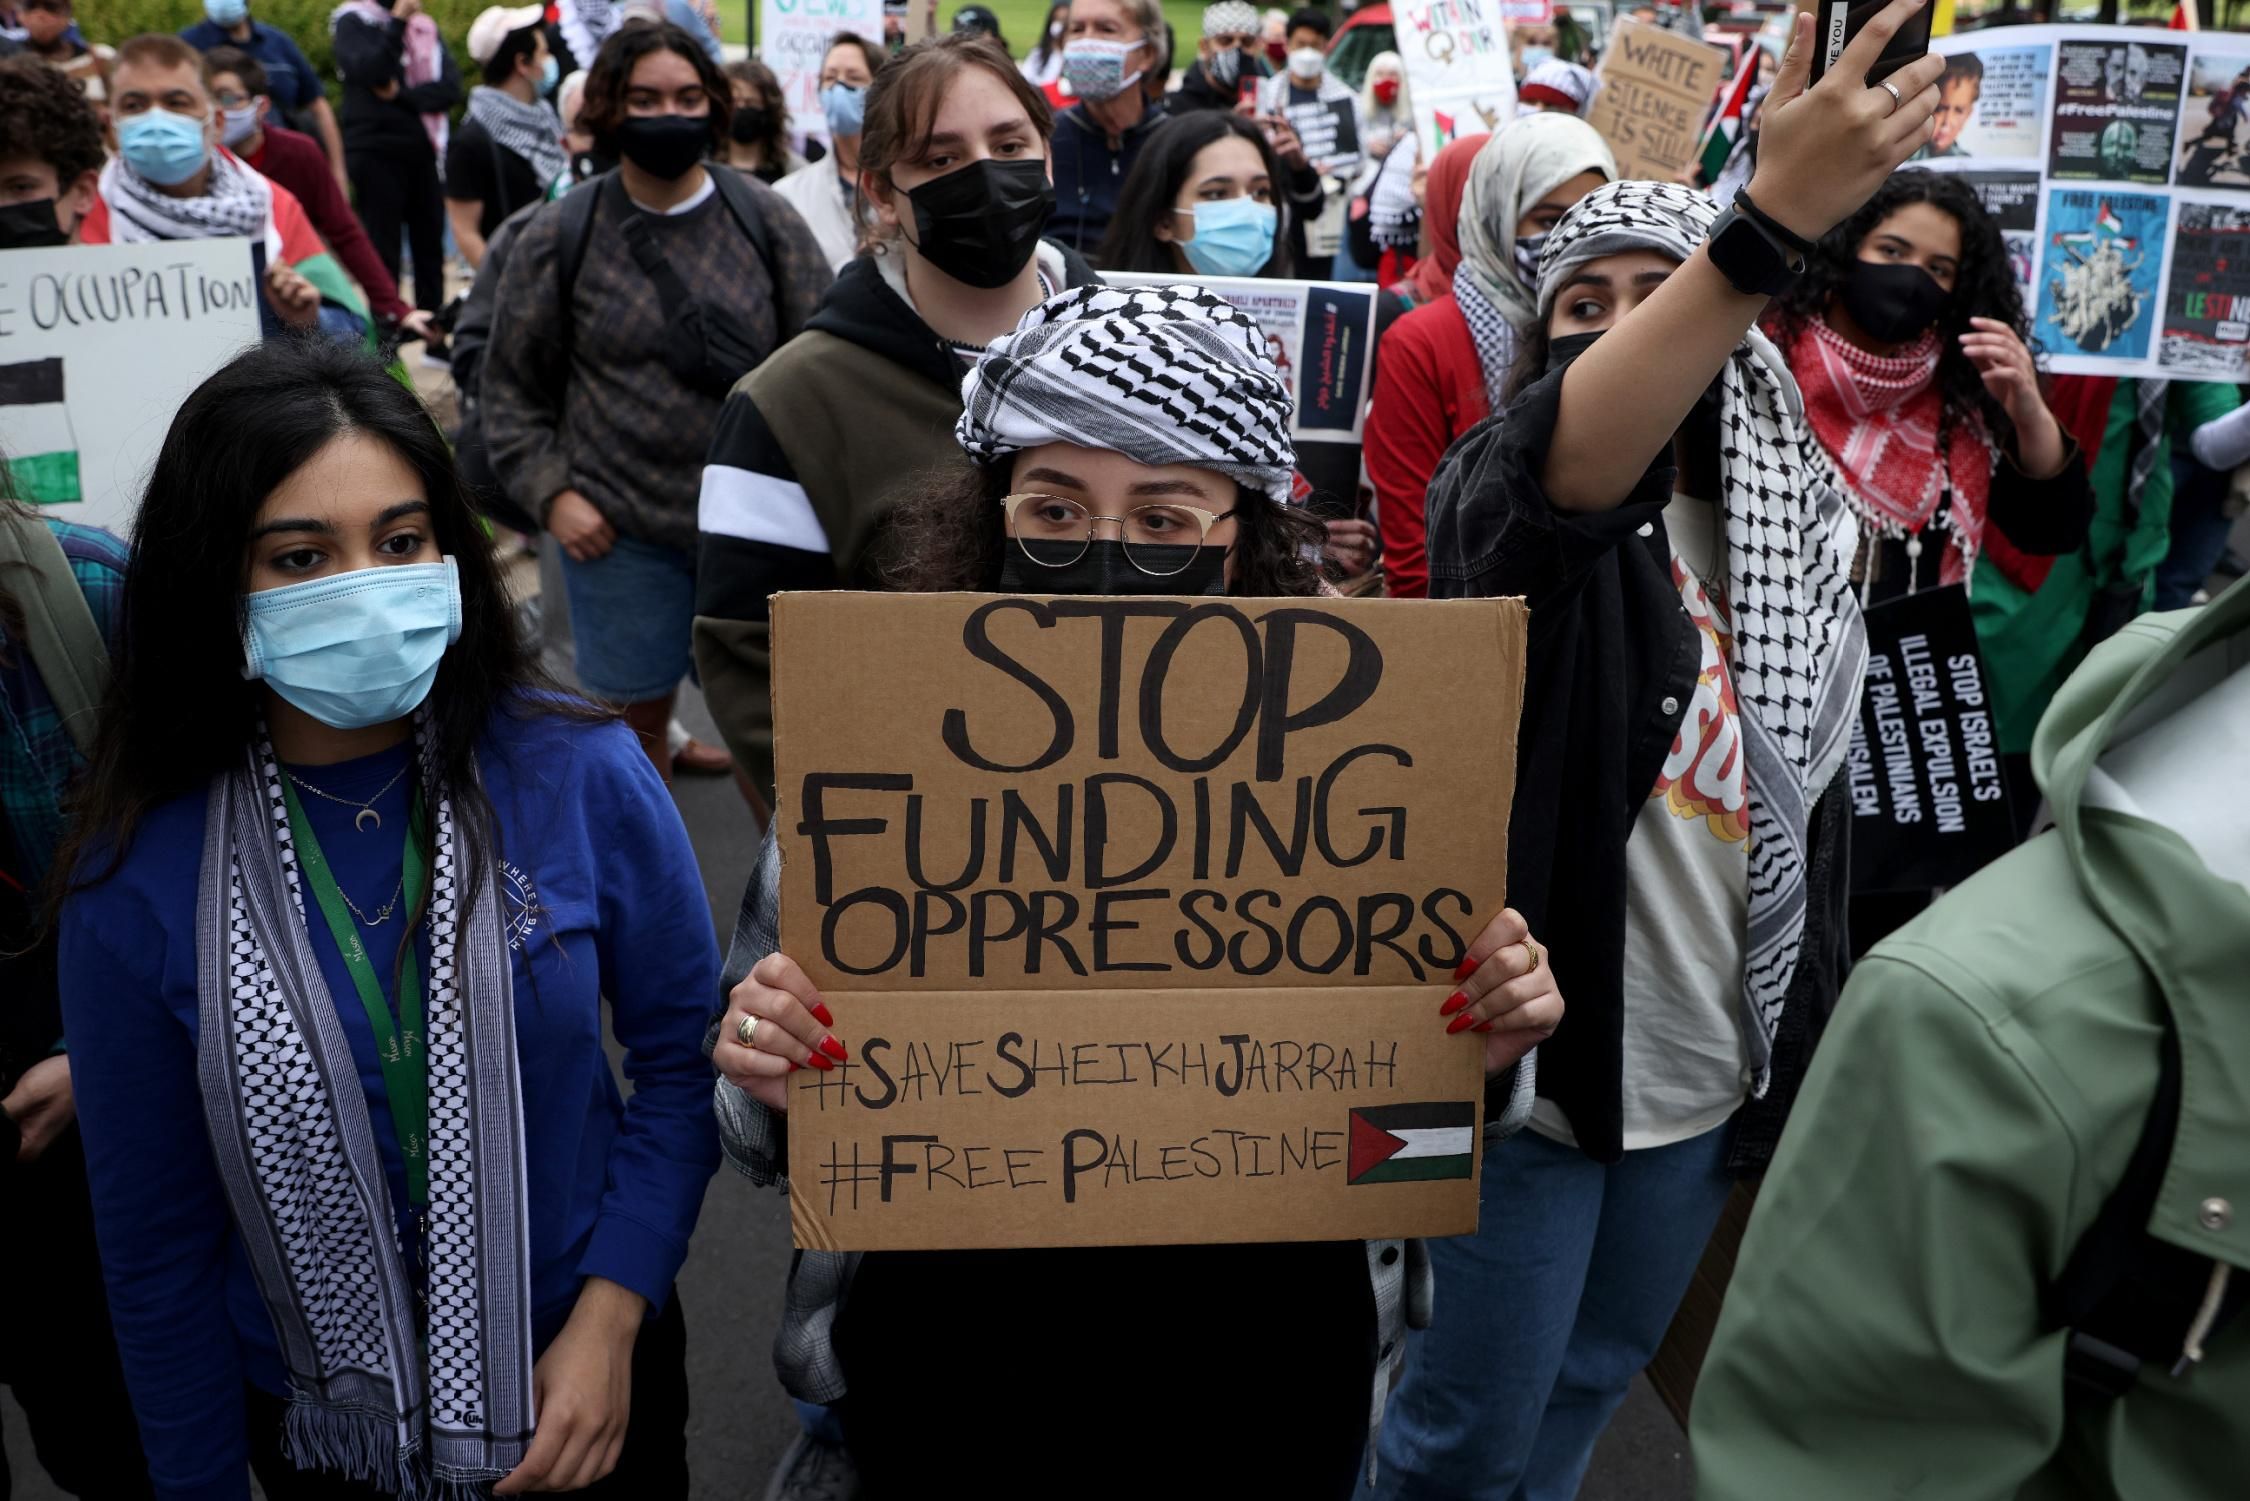 Protesters gather to demonstrate against Israel outside the U.S. State Department on May 11, 2021 in Washington, D.C.